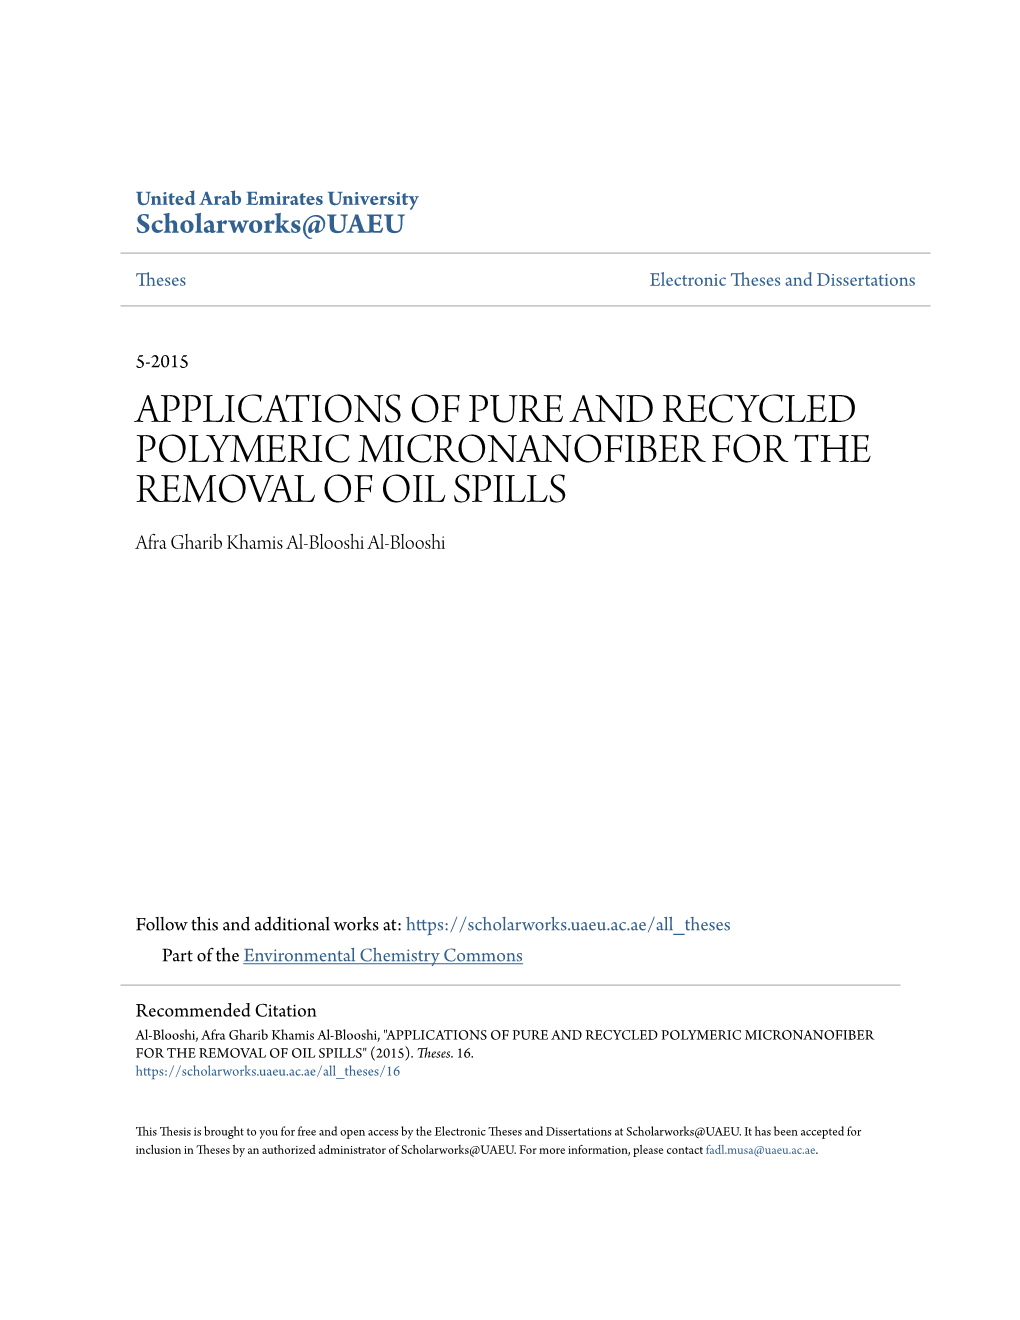 APPLICATIONS of PURE and RECYCLED POLYMERIC MICRONANOFIBER for the REMOVAL of OIL SPILLS Afra Gharib Khamis Al-Blooshi Al-Blooshi